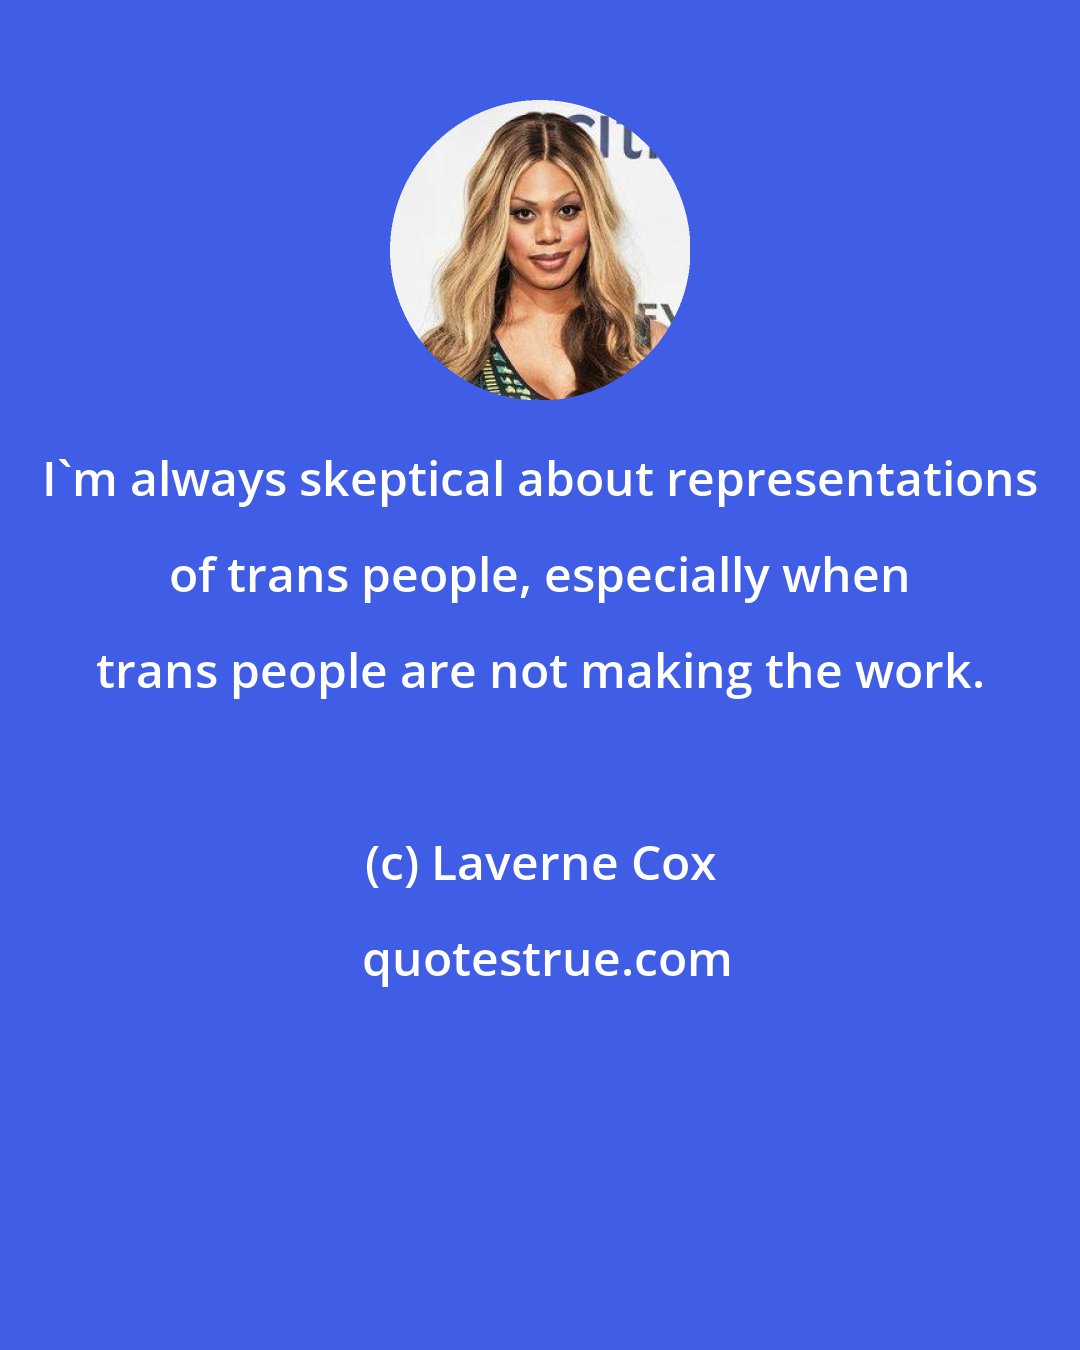 Laverne Cox: I'm always skeptical about representations of trans people, especially when trans people are not making the work.